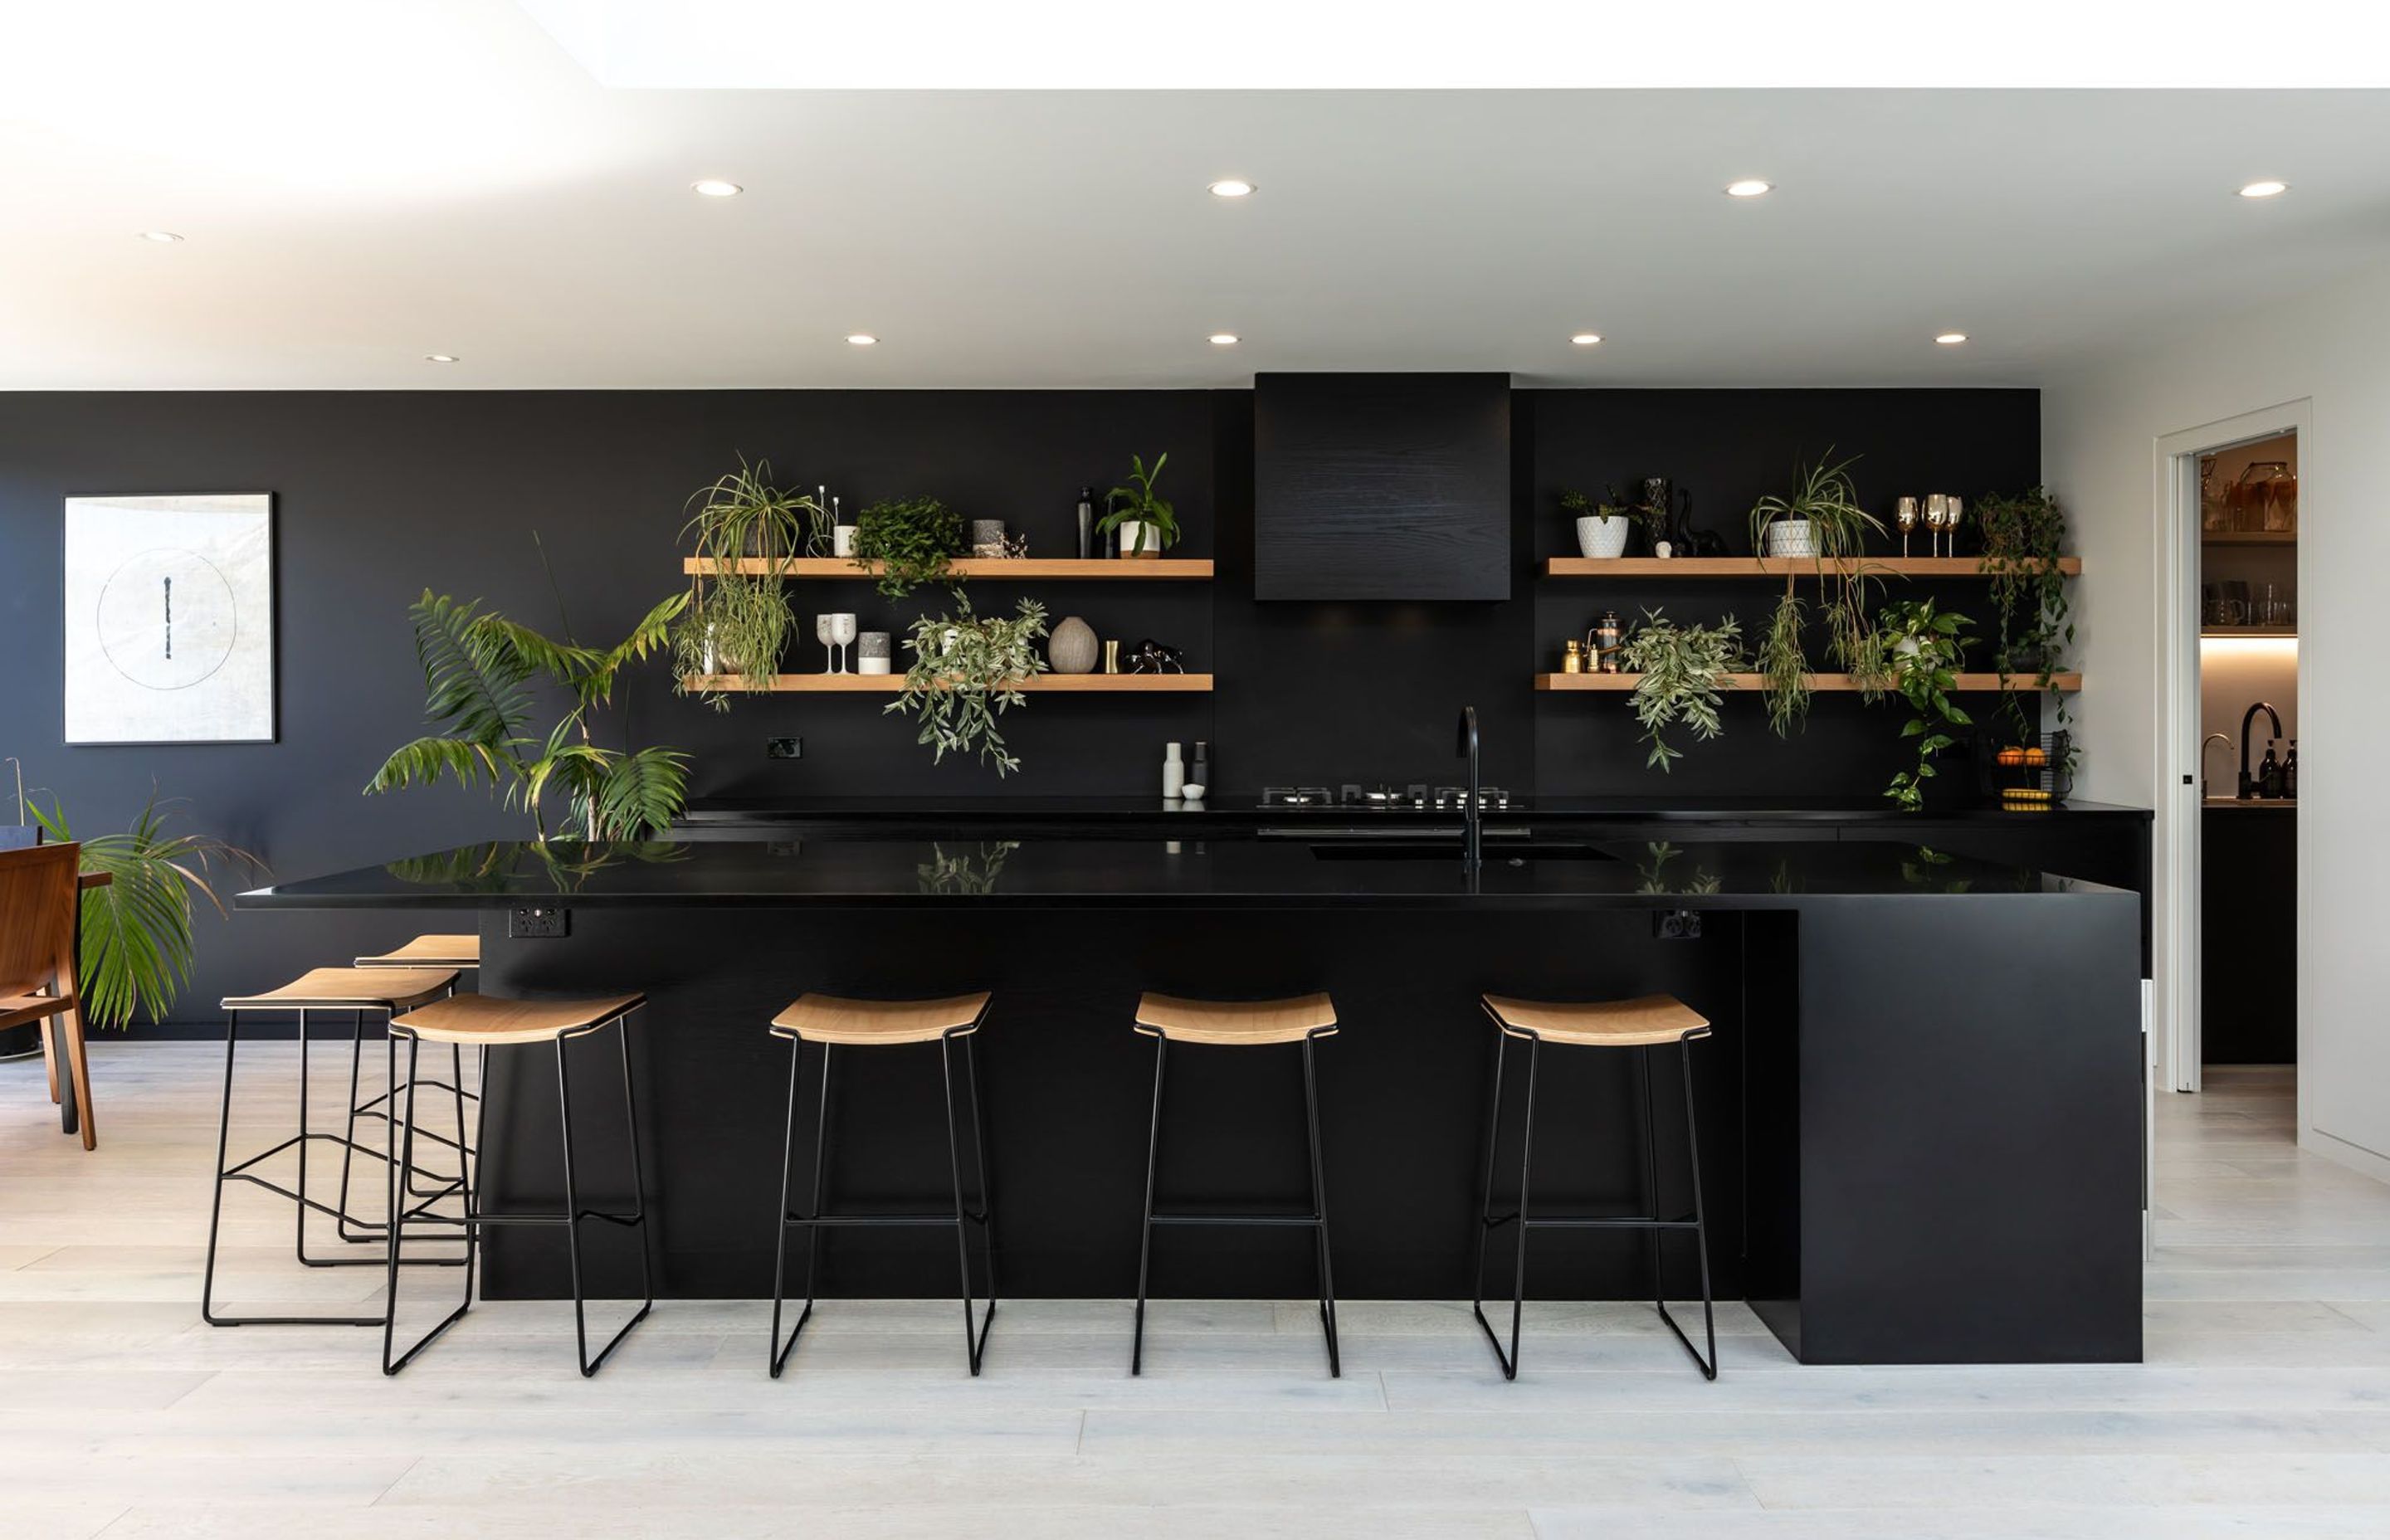 The kitchen has been designed to recede into the background through a clever use of colour and indoor plants.